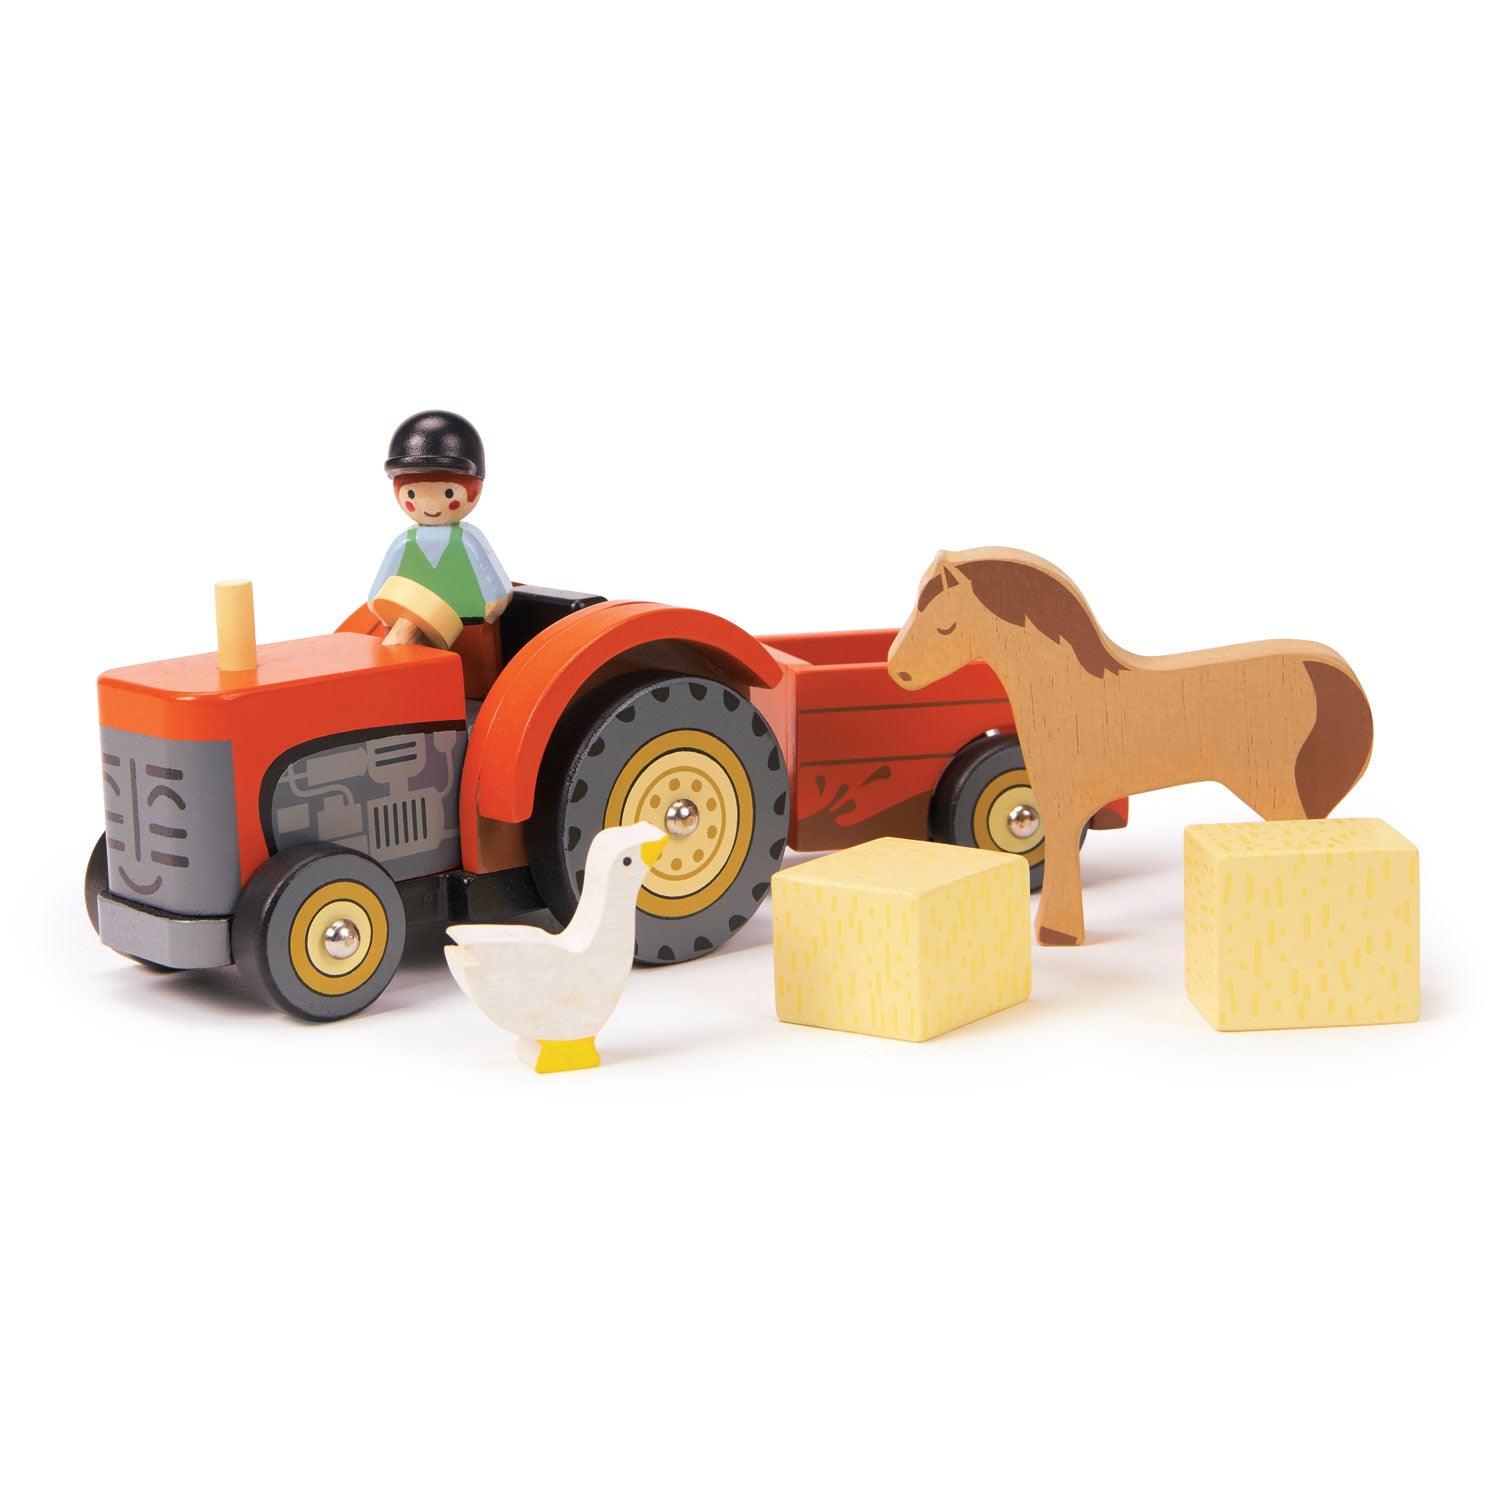 <p>A cheery farmyard tractor and removable trailer with driver, two hay bales, horse and goose. Made from wood and painted in bright red with illustrated details.</p>
<p>Age range: 18 months +  </p>
<p> Product size: 9.45 x 3.94 x 4.33”  </p>
<p> Weight: 1.12 lbs</p>
<p><strong>Related Product</strong><a href="https://kids.allwomenstalk.com/products/tender-leaf-farm">Tender Leaf Farm</a></p>
<p><a href="https://www.dropbox.com/s/gcuqmfs5k6ovhoz/TL8485%20Farmyard%20Tractor%20Printable.pdf?dl=0"><strong>Download Tractor Trails Printable</strong></a></p>
